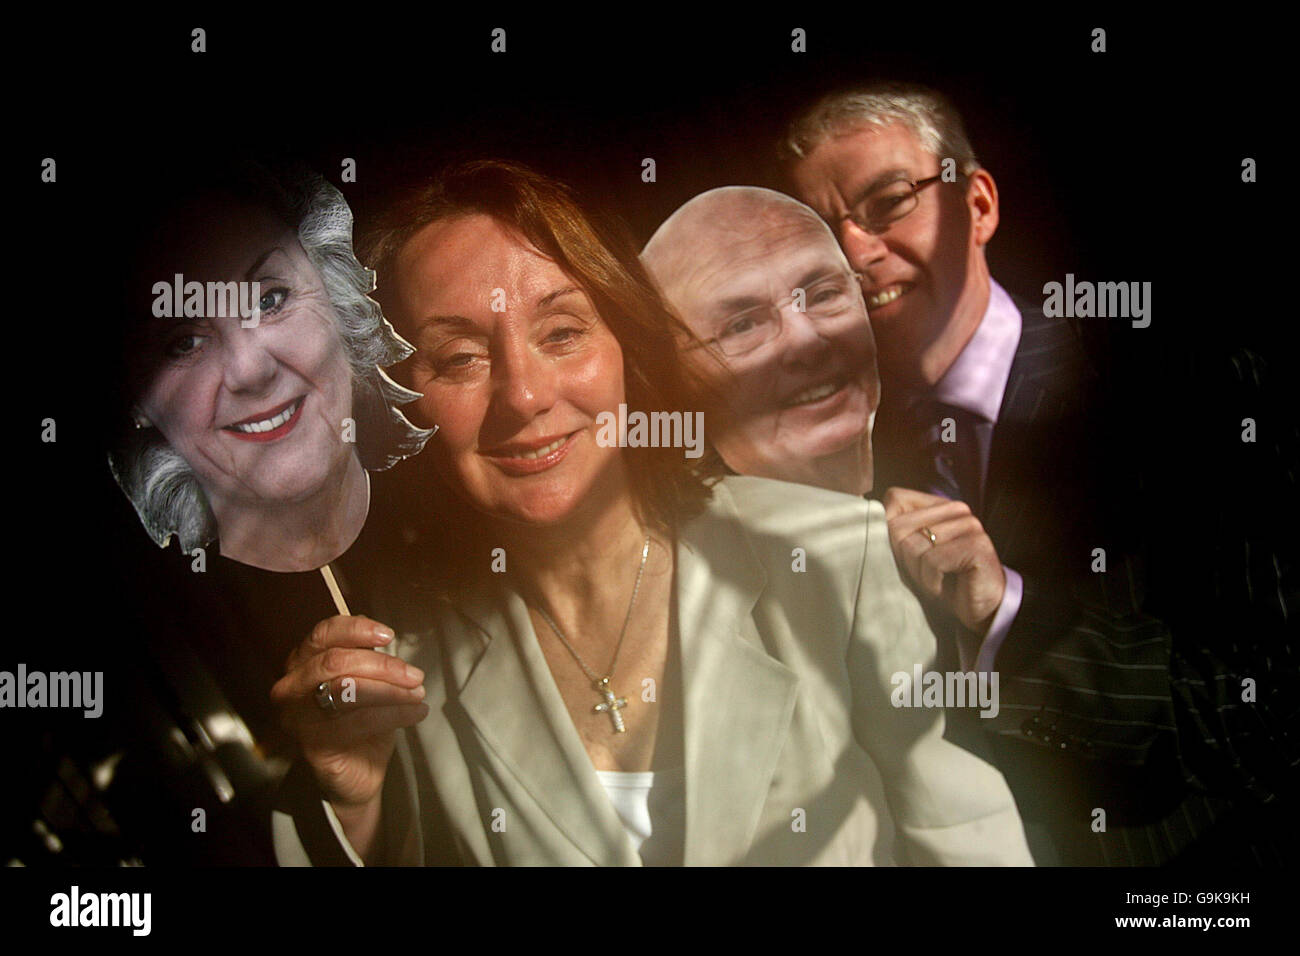 Rose Anne Kenny, TCD Professor of Geriatric Medicine and Principal Investigator of Ireland's first Longitudinal Study On Ageing (TILDA) launches the report with Donal Casey, the Chief Executive of Irish Life, at Trinity College Dublin, alongside computer generated masks of themselves aged. Stock Photo